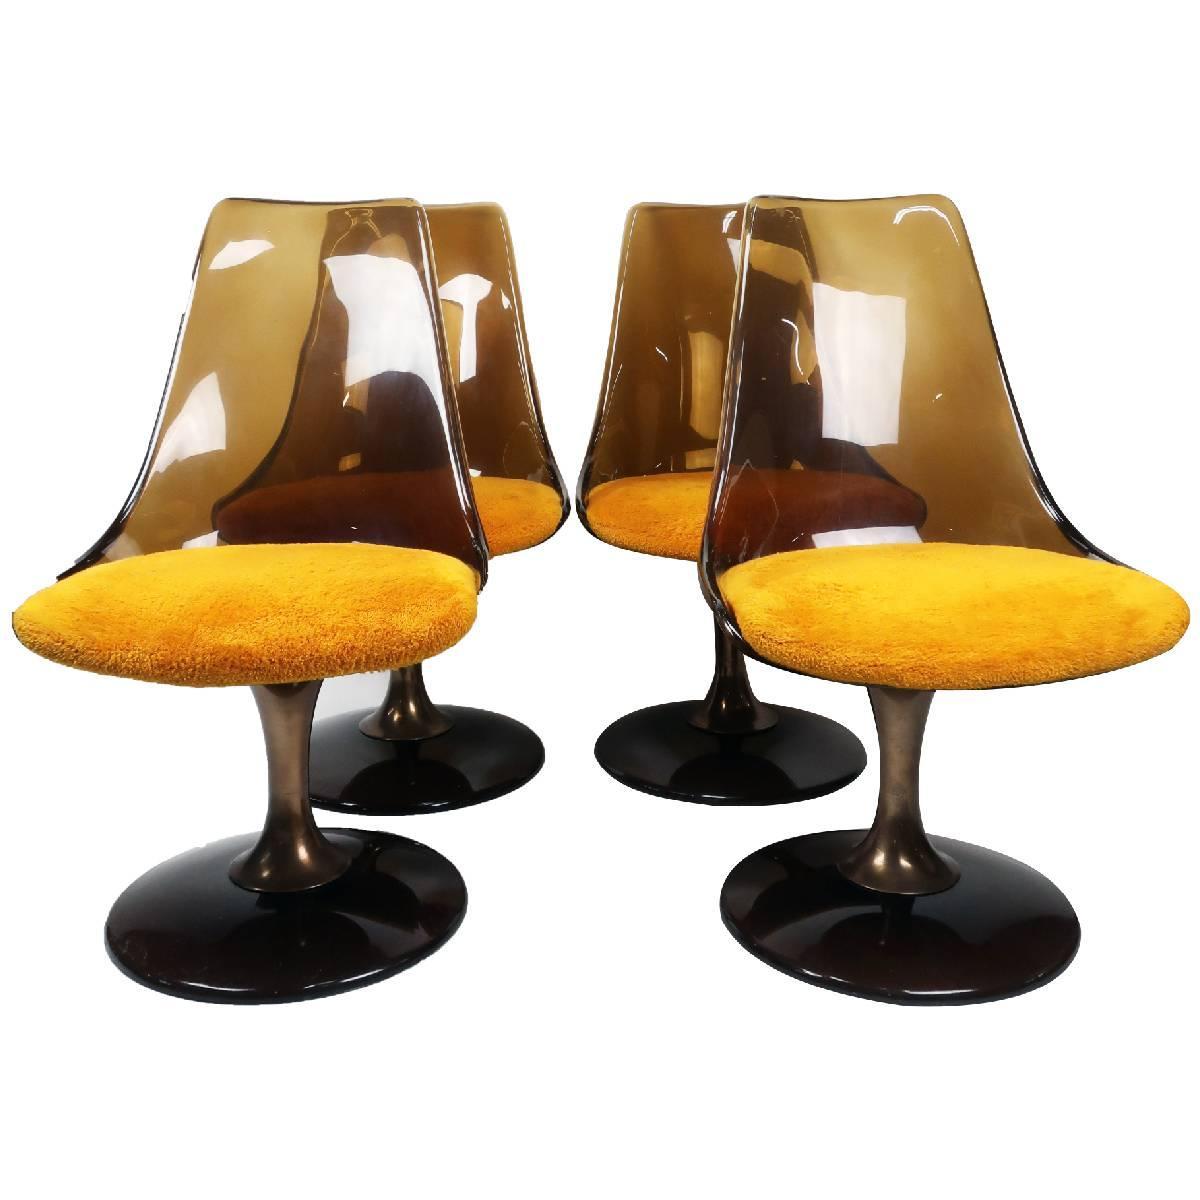 Mid-Century Modern Chromcraft Amber Lucite Tulip Chairs and Table Set